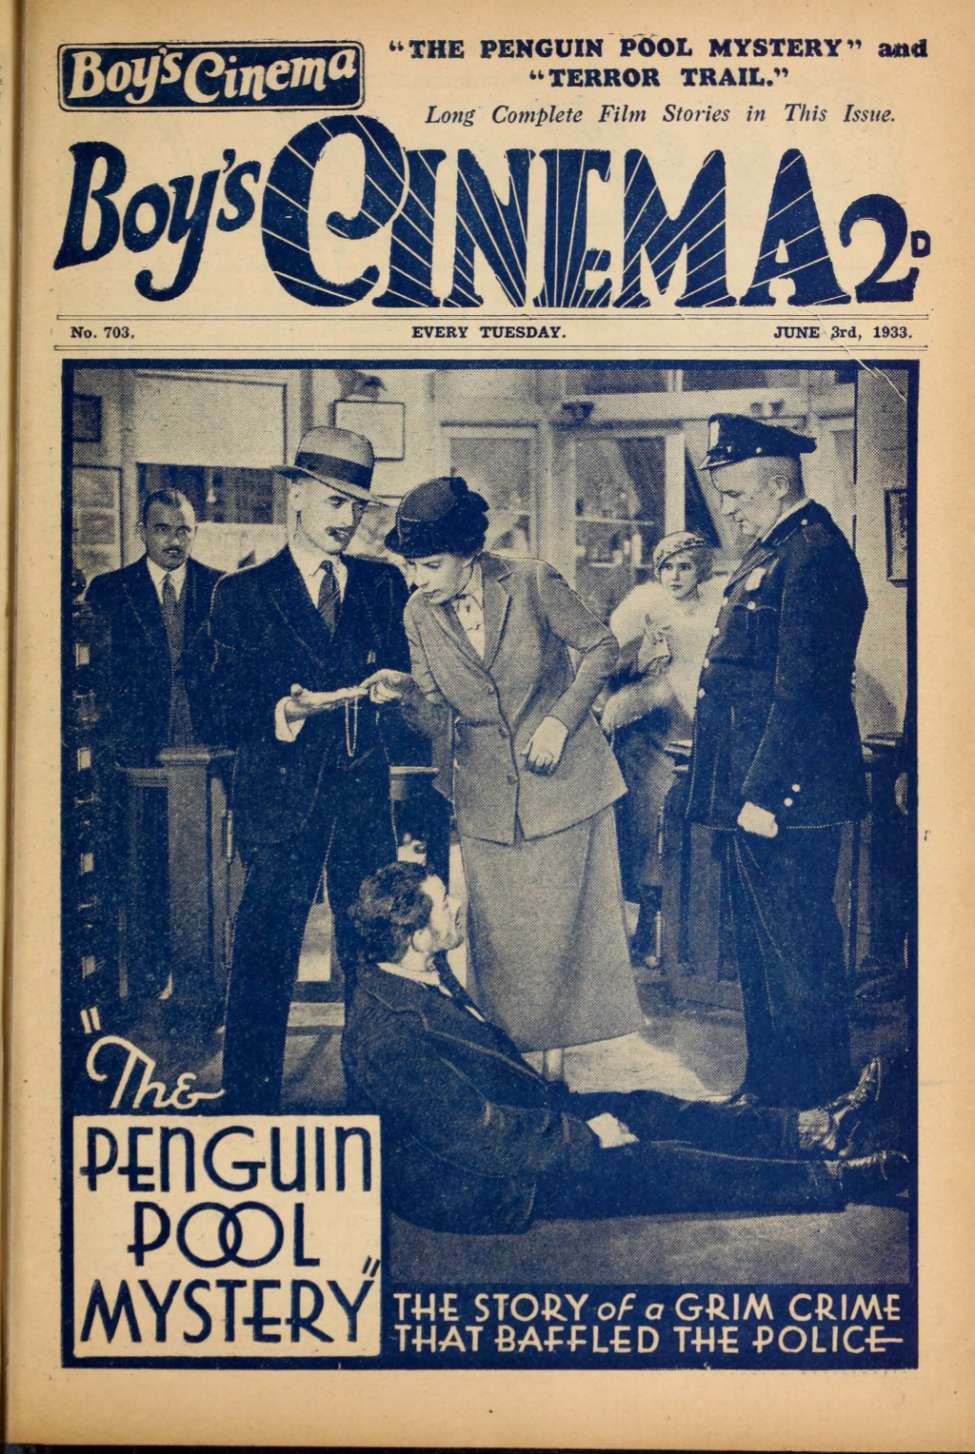 Comic Book Cover For Boy's Cinema 703 - The Penguin Pool Mystery - Edna May Oliver